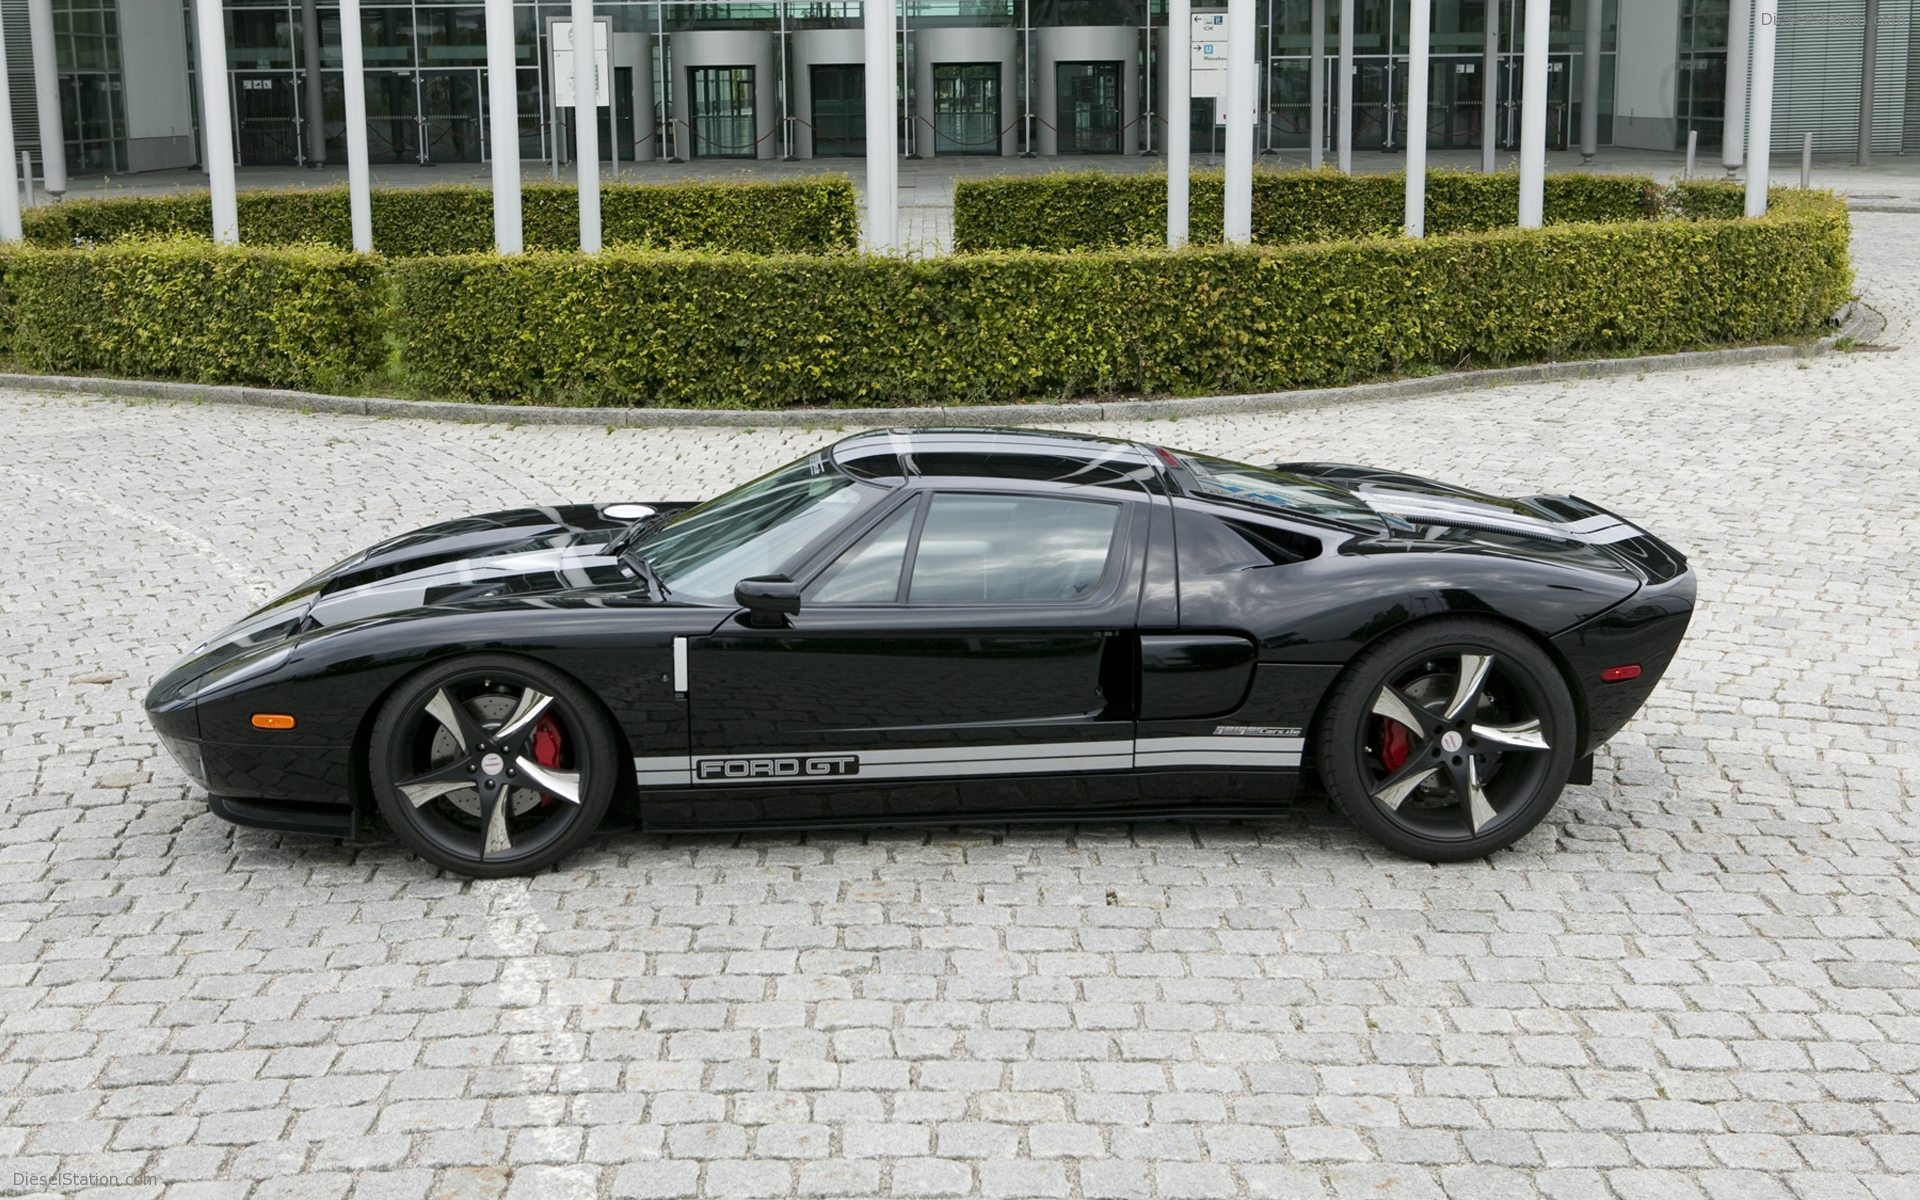 Geigercars De Tunes The Ford Gt Widescreen Exotic Car Pictures Of